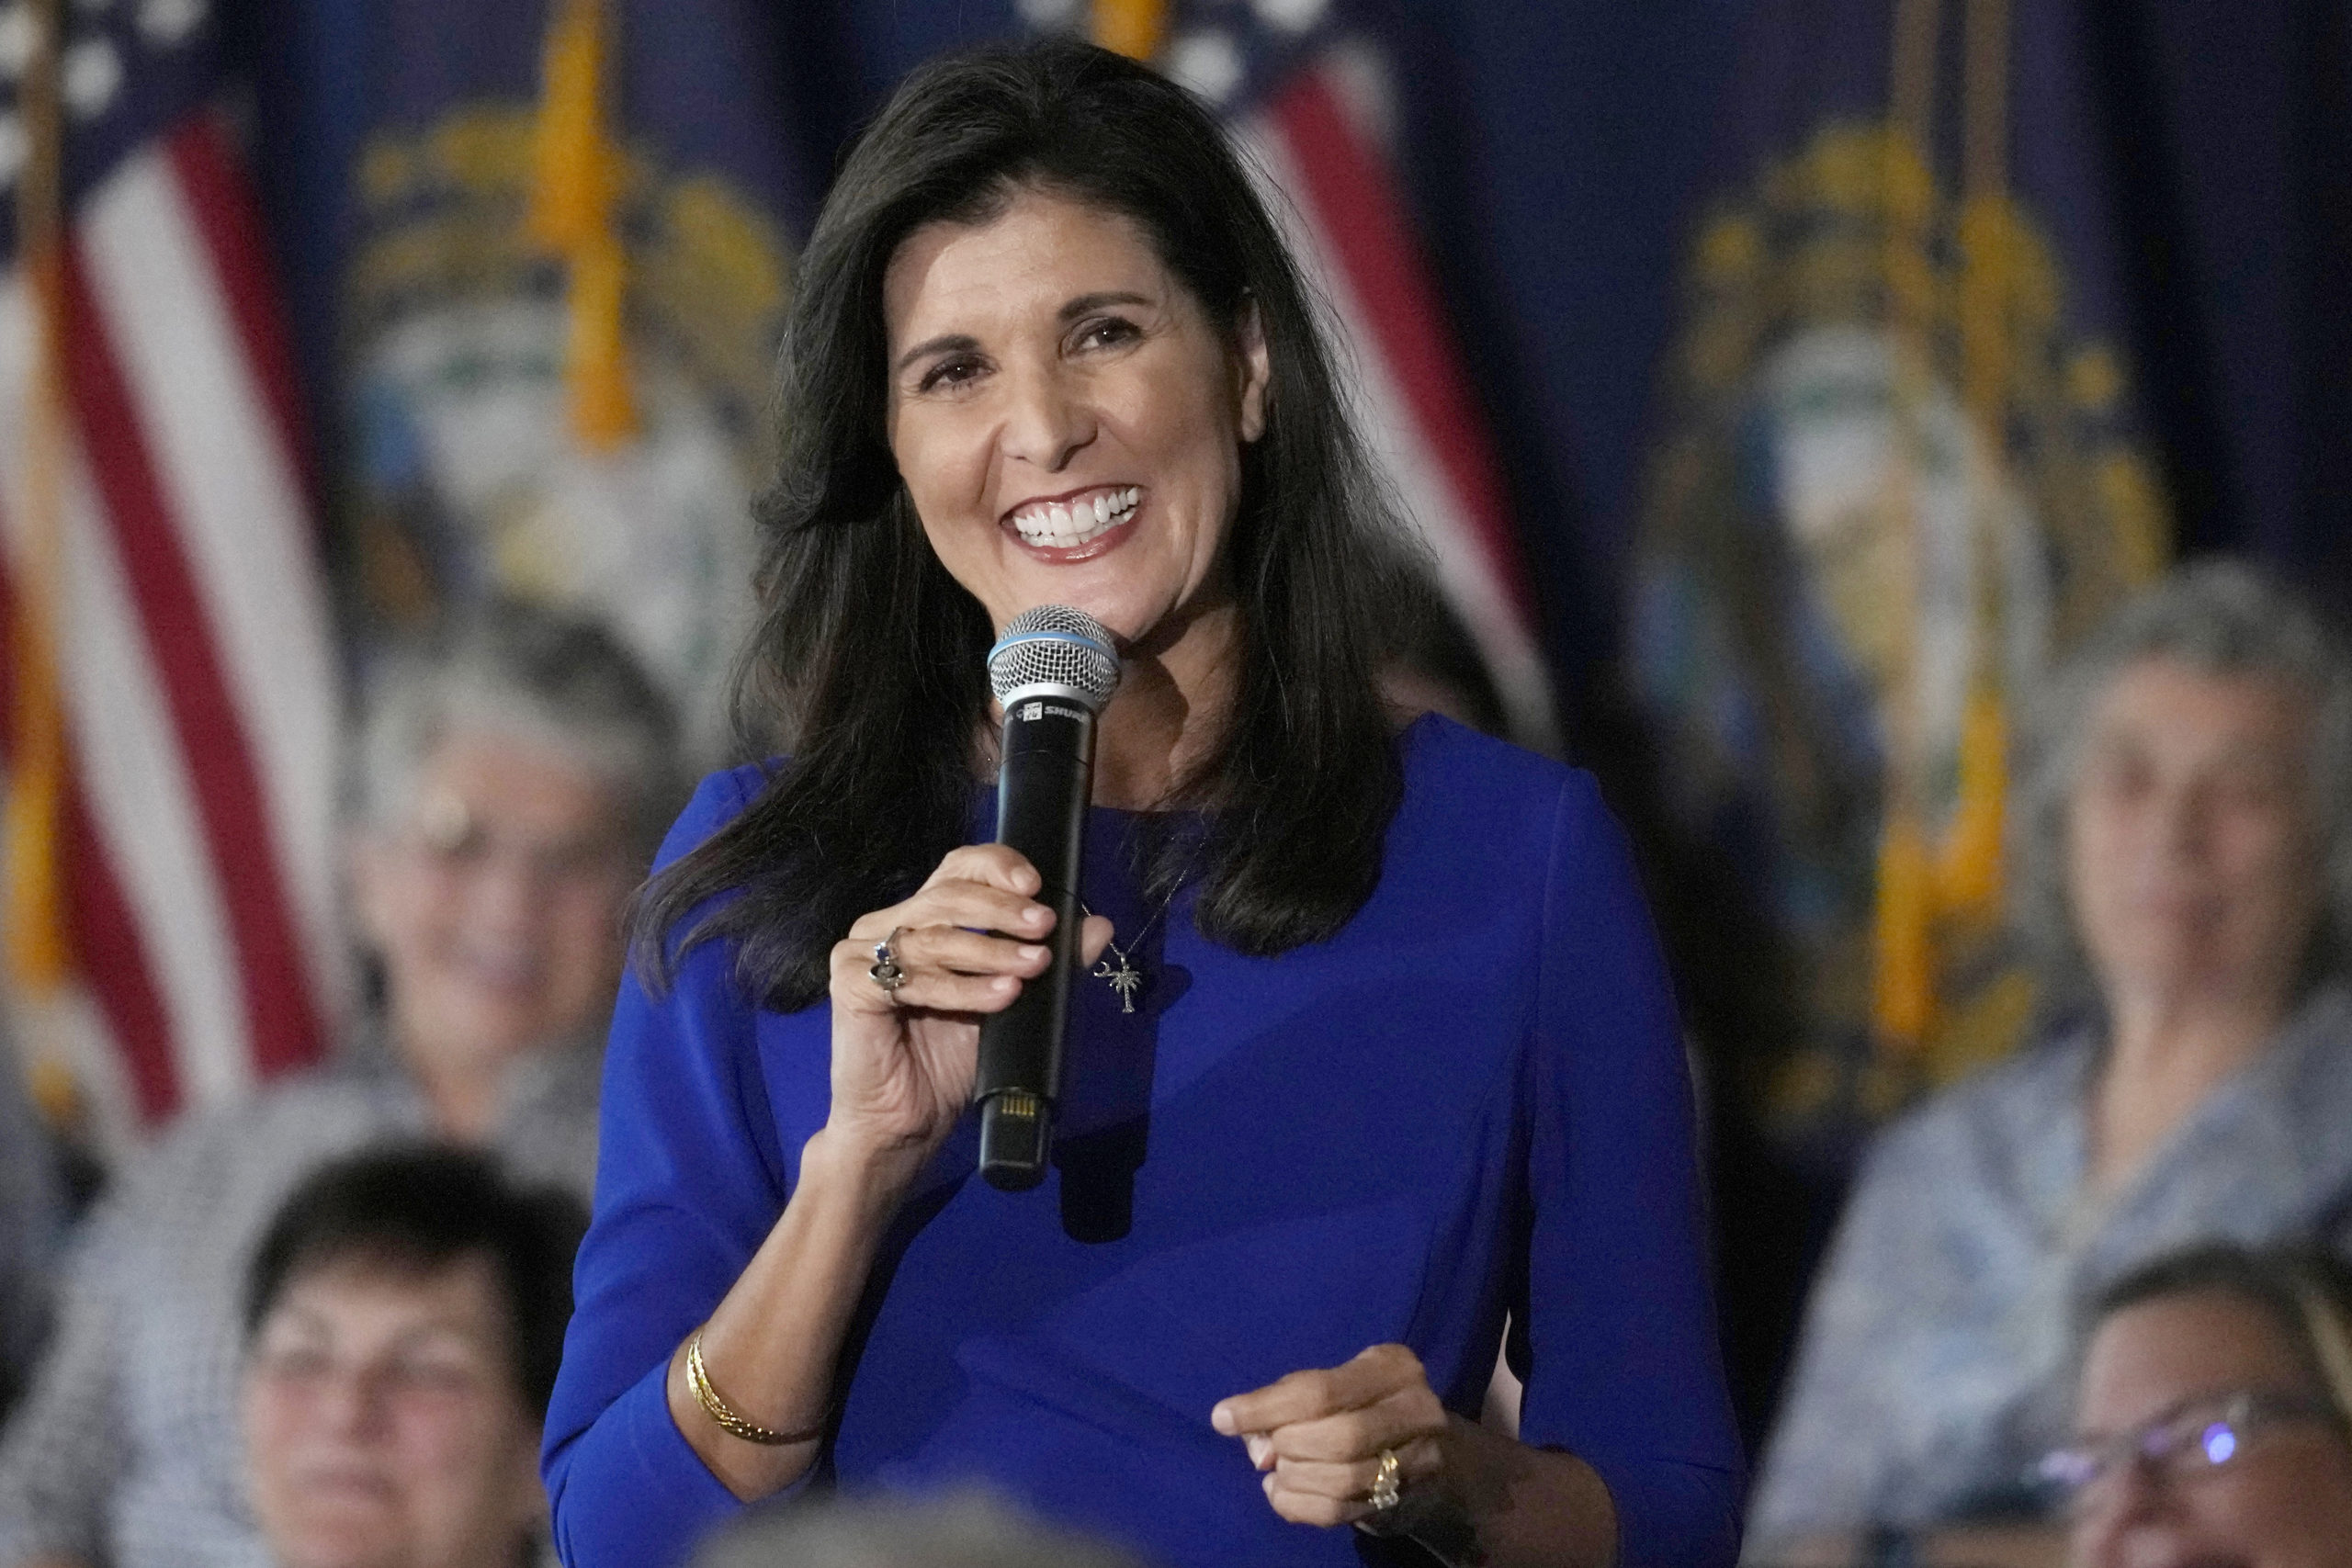 Nikki Haley’s spouse to leave for extended deployment during 2024 campaign.